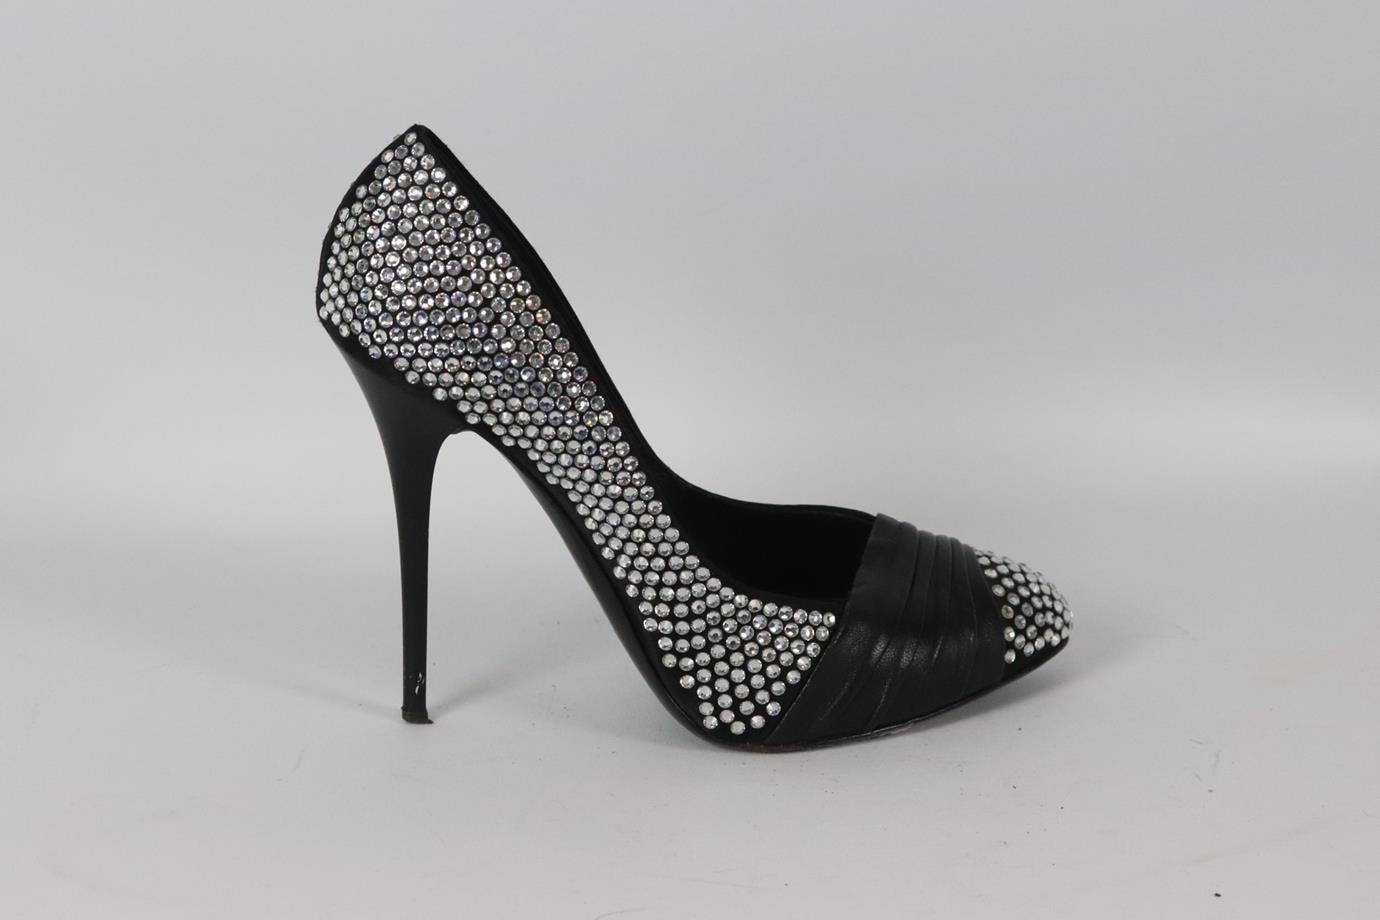 Giuseppe Zanotti crystal embellished satin and leather pumps. Black and silver. Slips on. Does not come with dustbag or box. Size: EU 39 (UK 6, US 9). Insole: 9.5 in. Heel height: 3.5 in. Very good condition - Some wear to soles. Light wear to upper